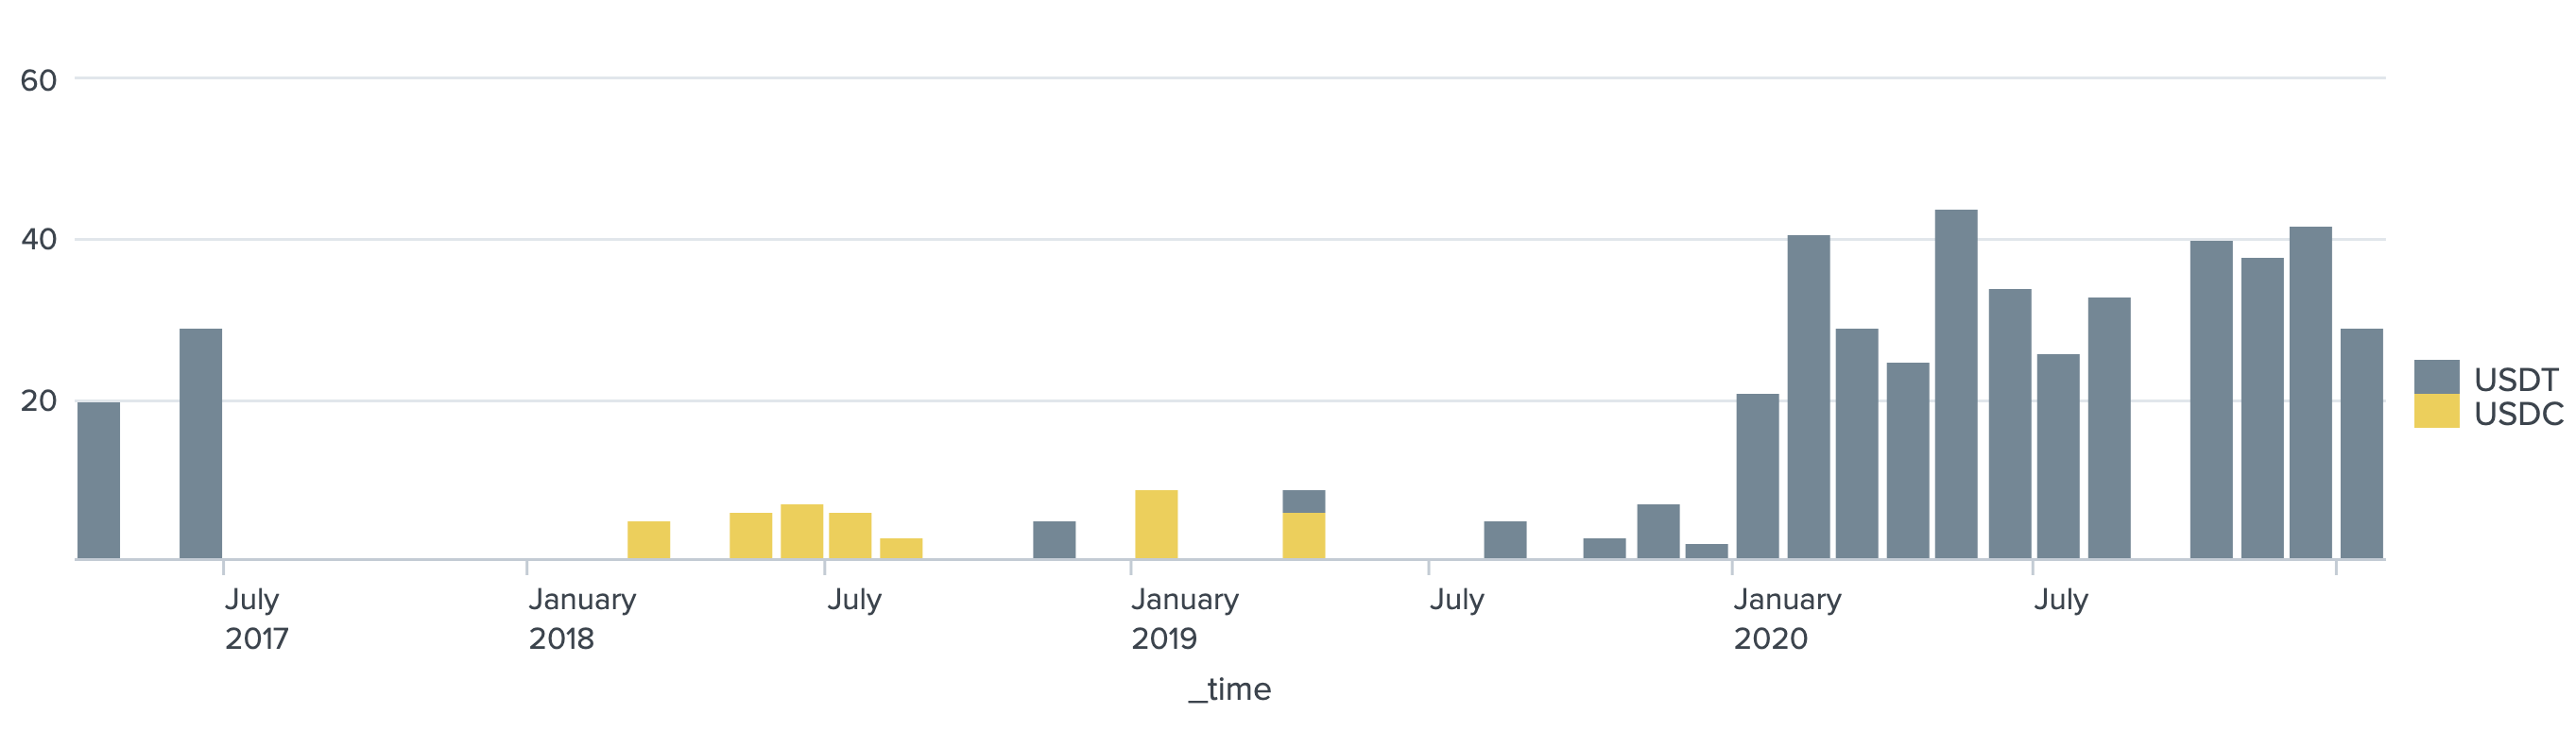 Count of court filings with USDT mentions compared to those with USDC mentions. Source: NTerminal